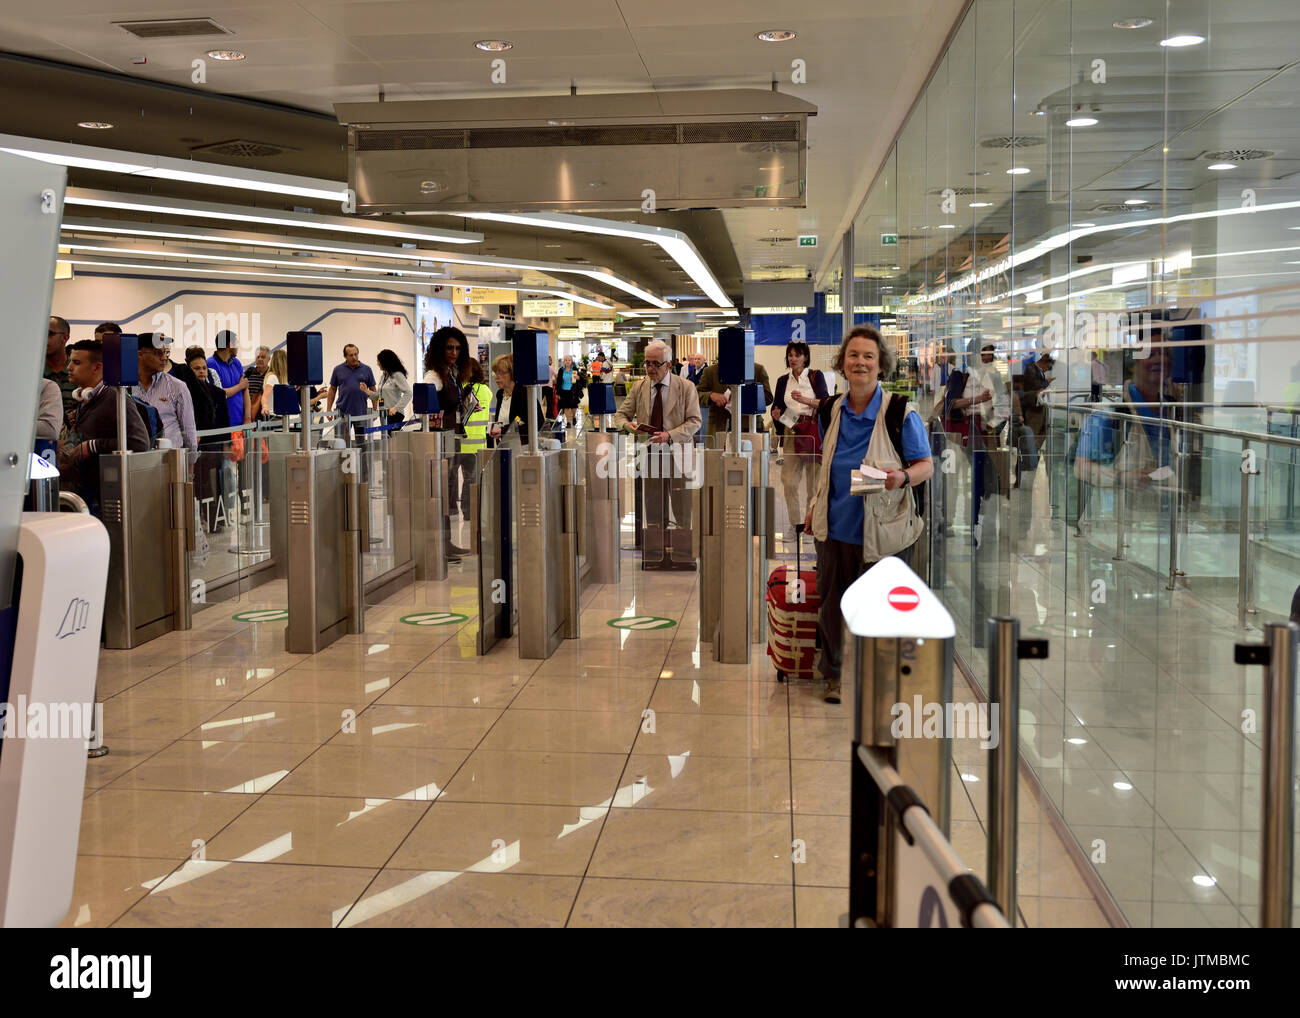 Airport boarding gate security check-in Naples, Italy Stock Photo